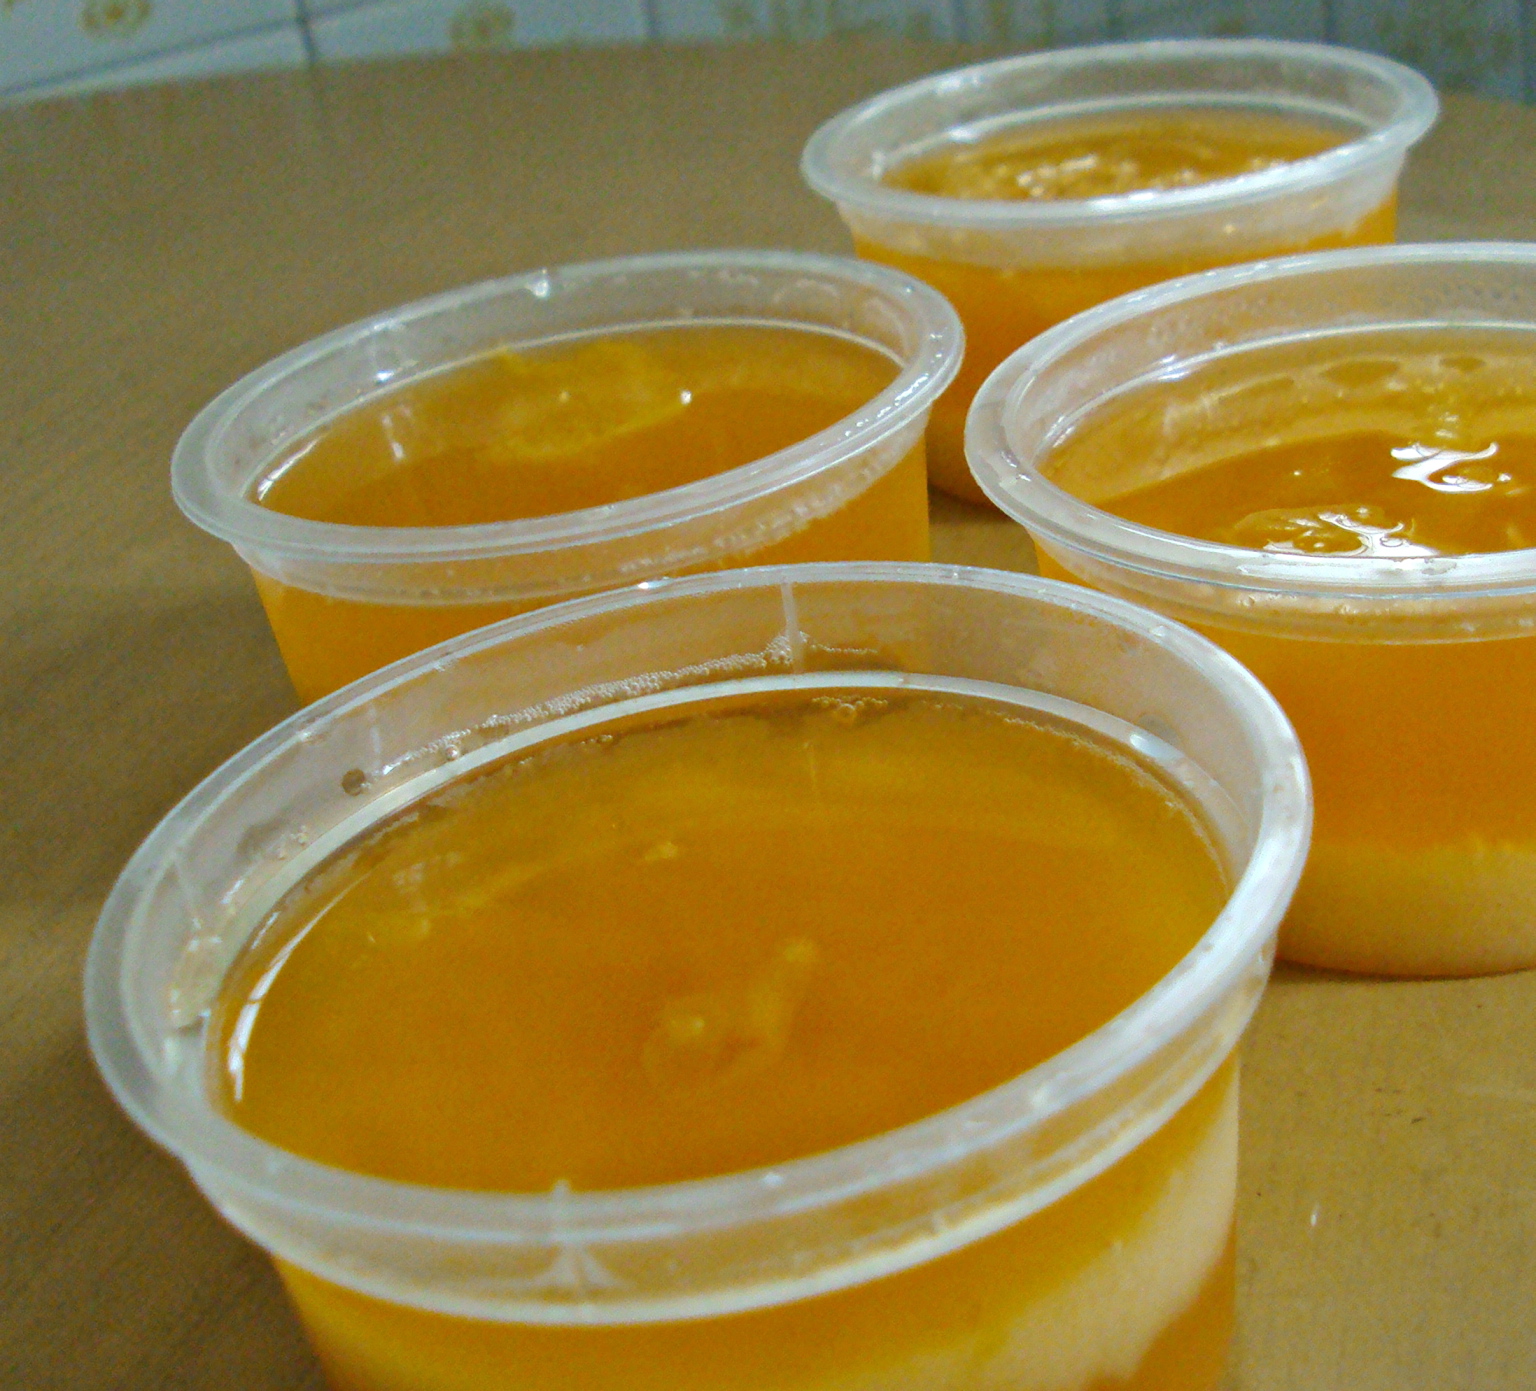 Outrageous Orange Jelly